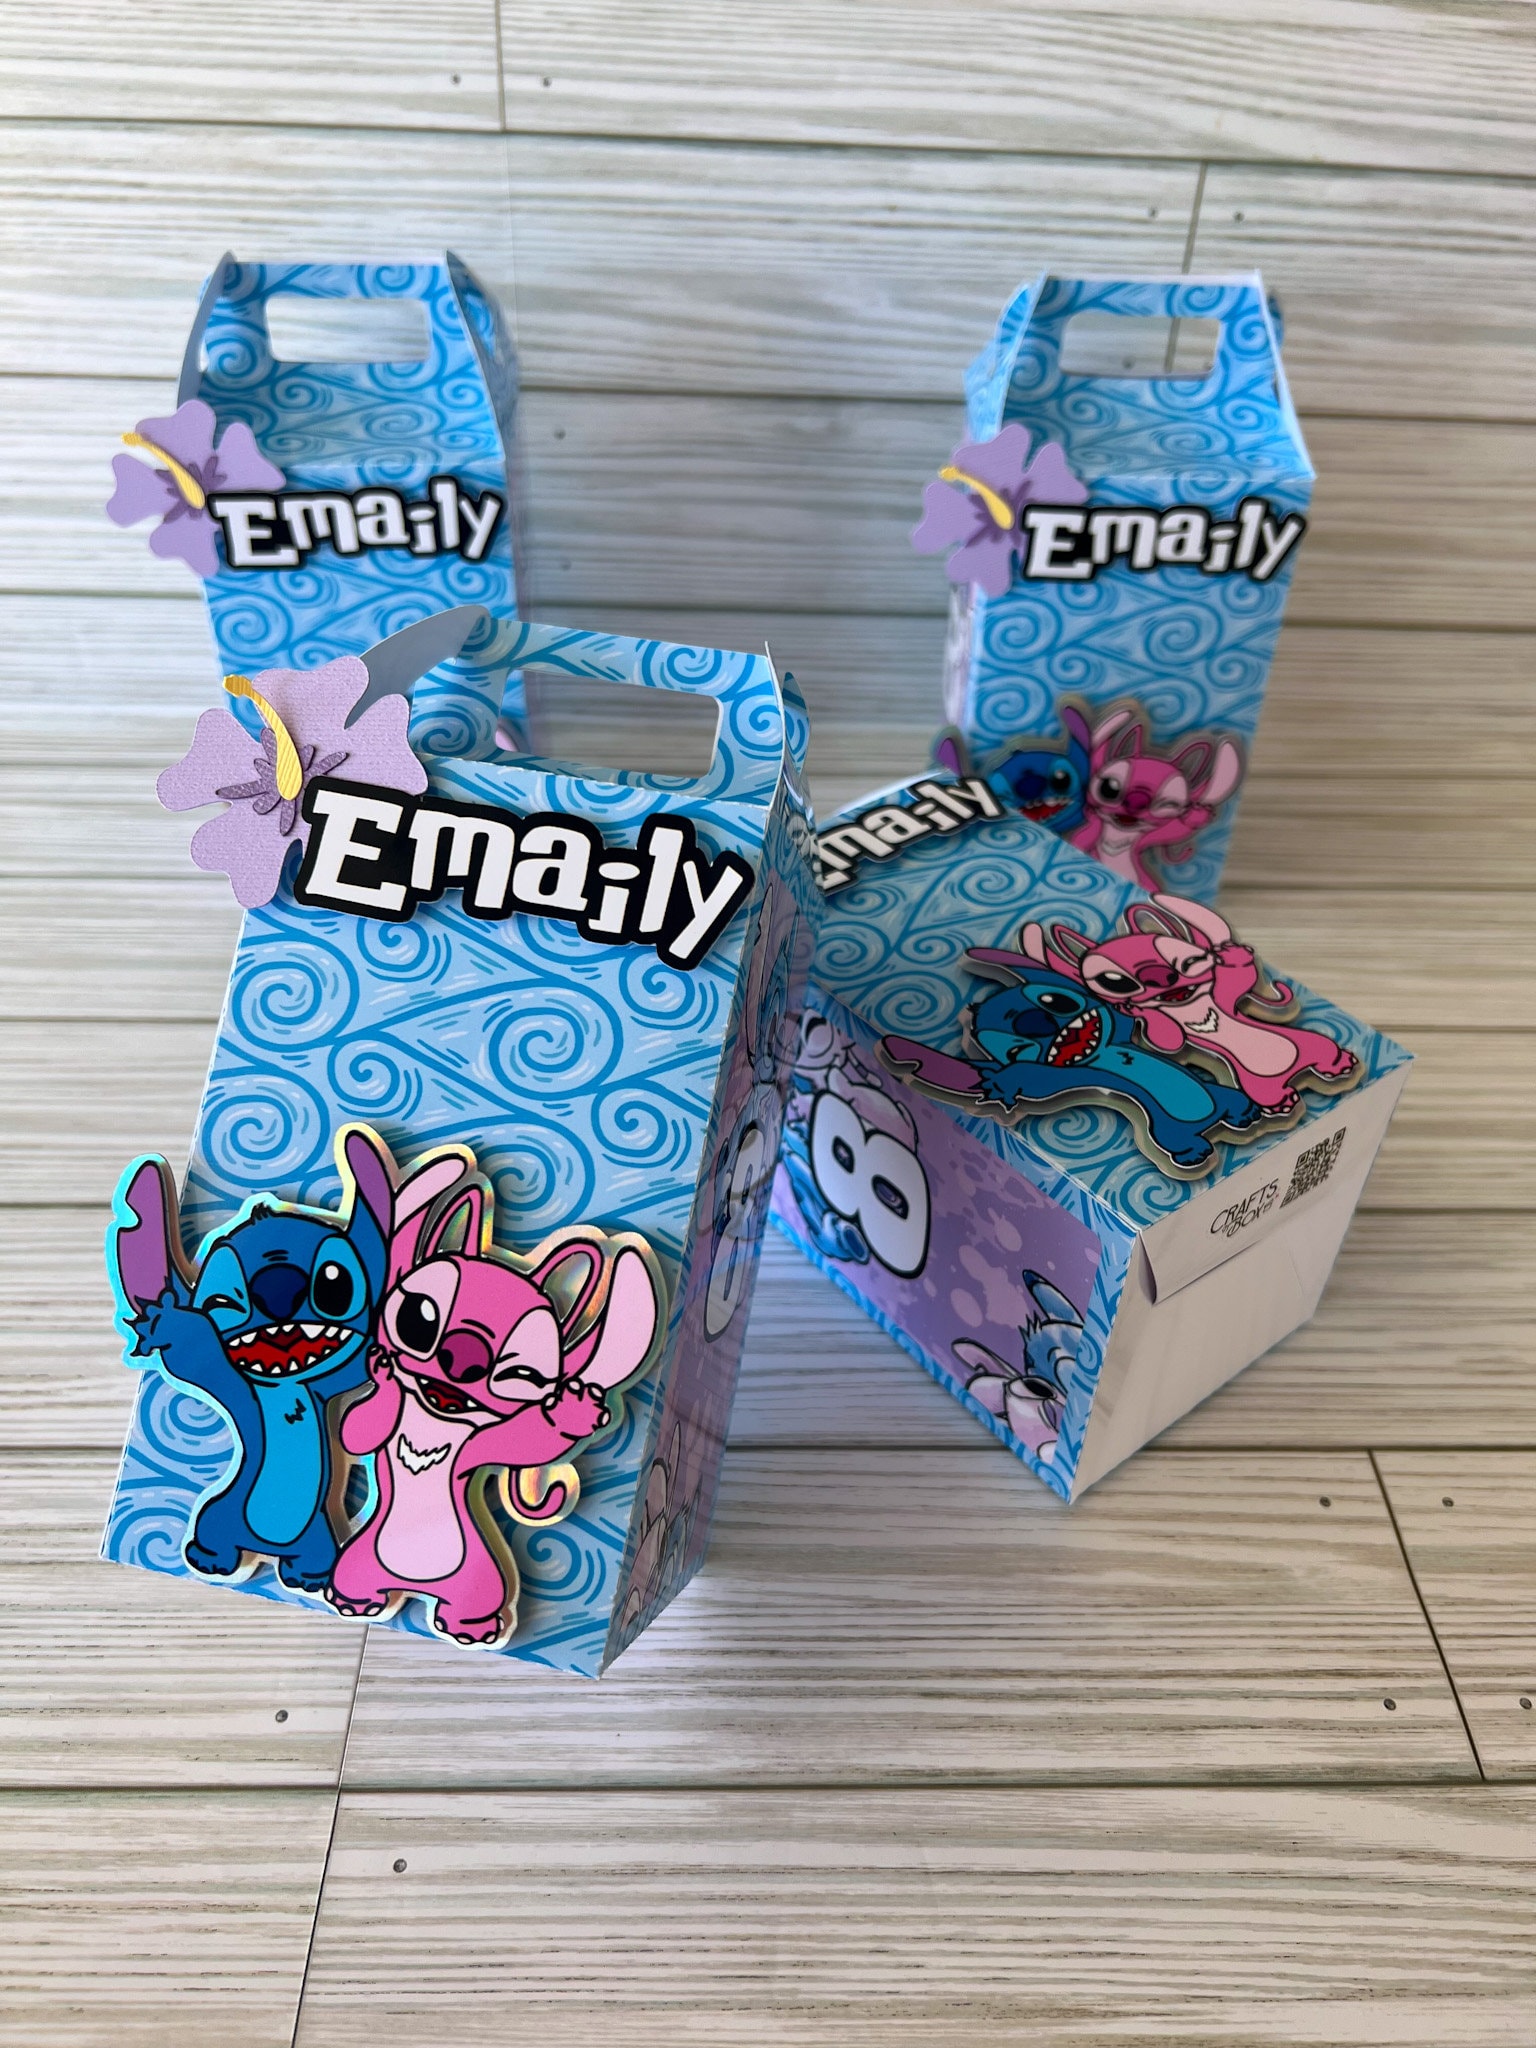 Lilo & Stitch Candy Box Cute Stitch Gift Favor Bags Candy Box Snack Goody  Cardboard Boxes Perfect For Kids Party Supplies